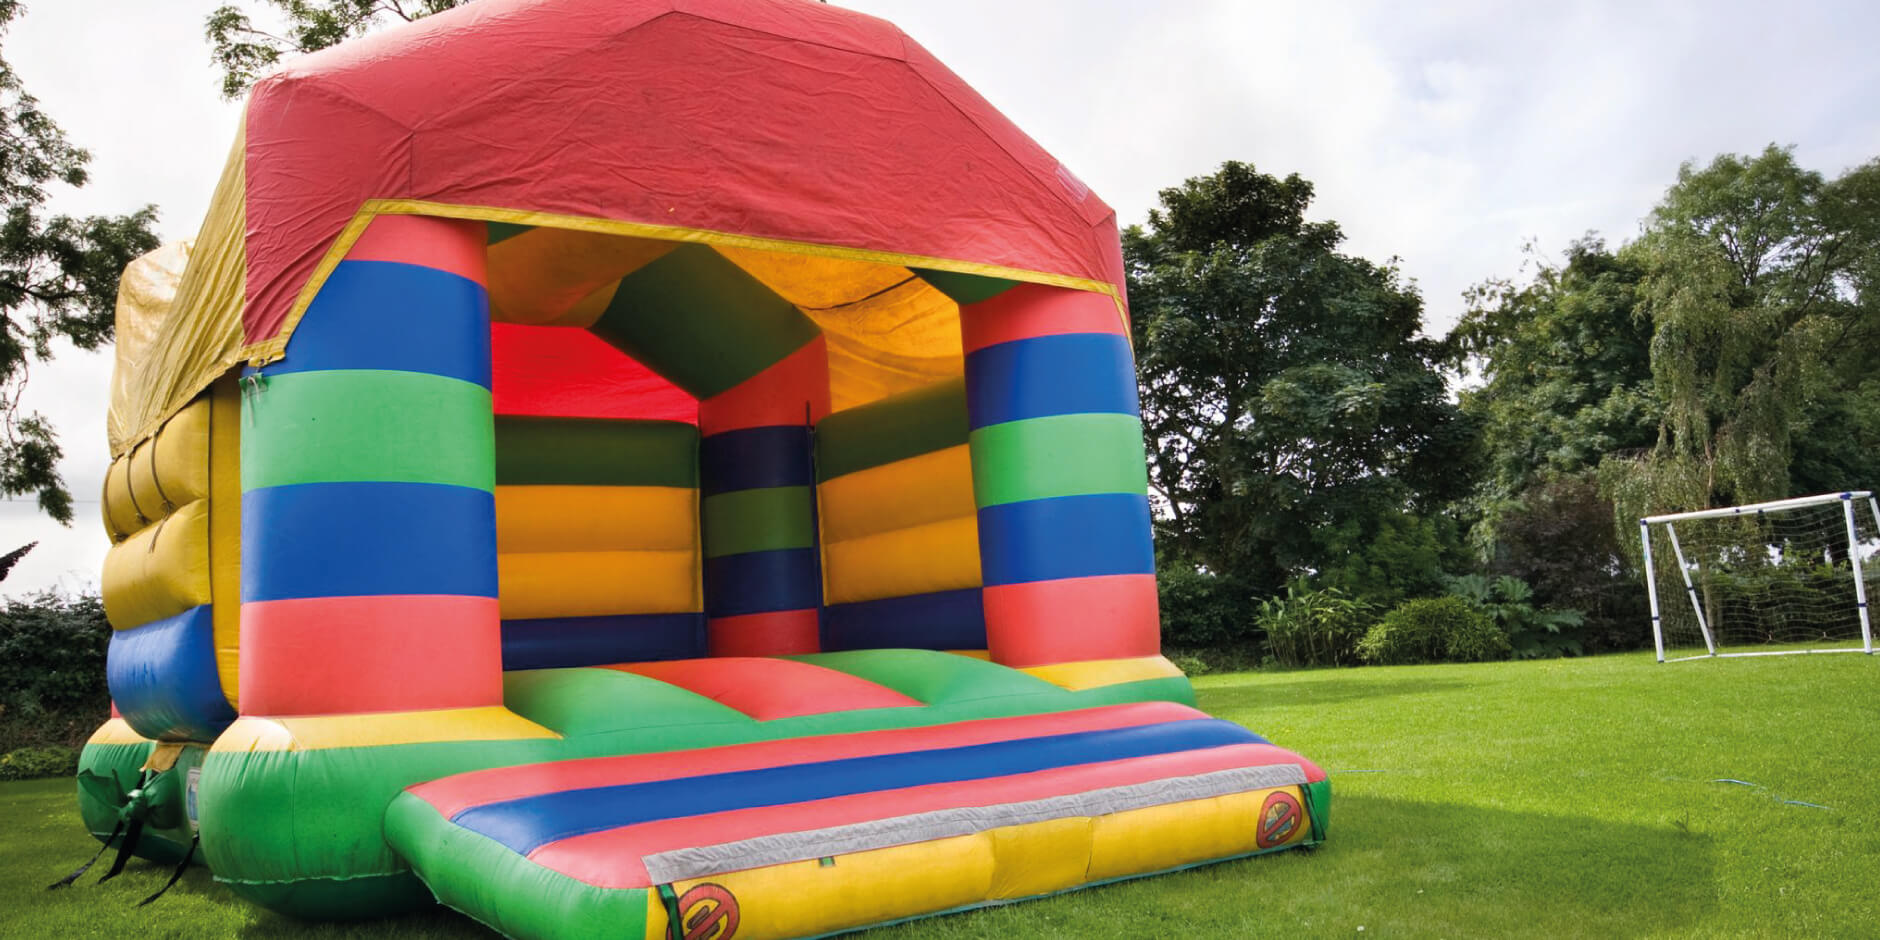 Top Safety Tips for Bouncy Castle Fun at Your Next Hertfordshire Event